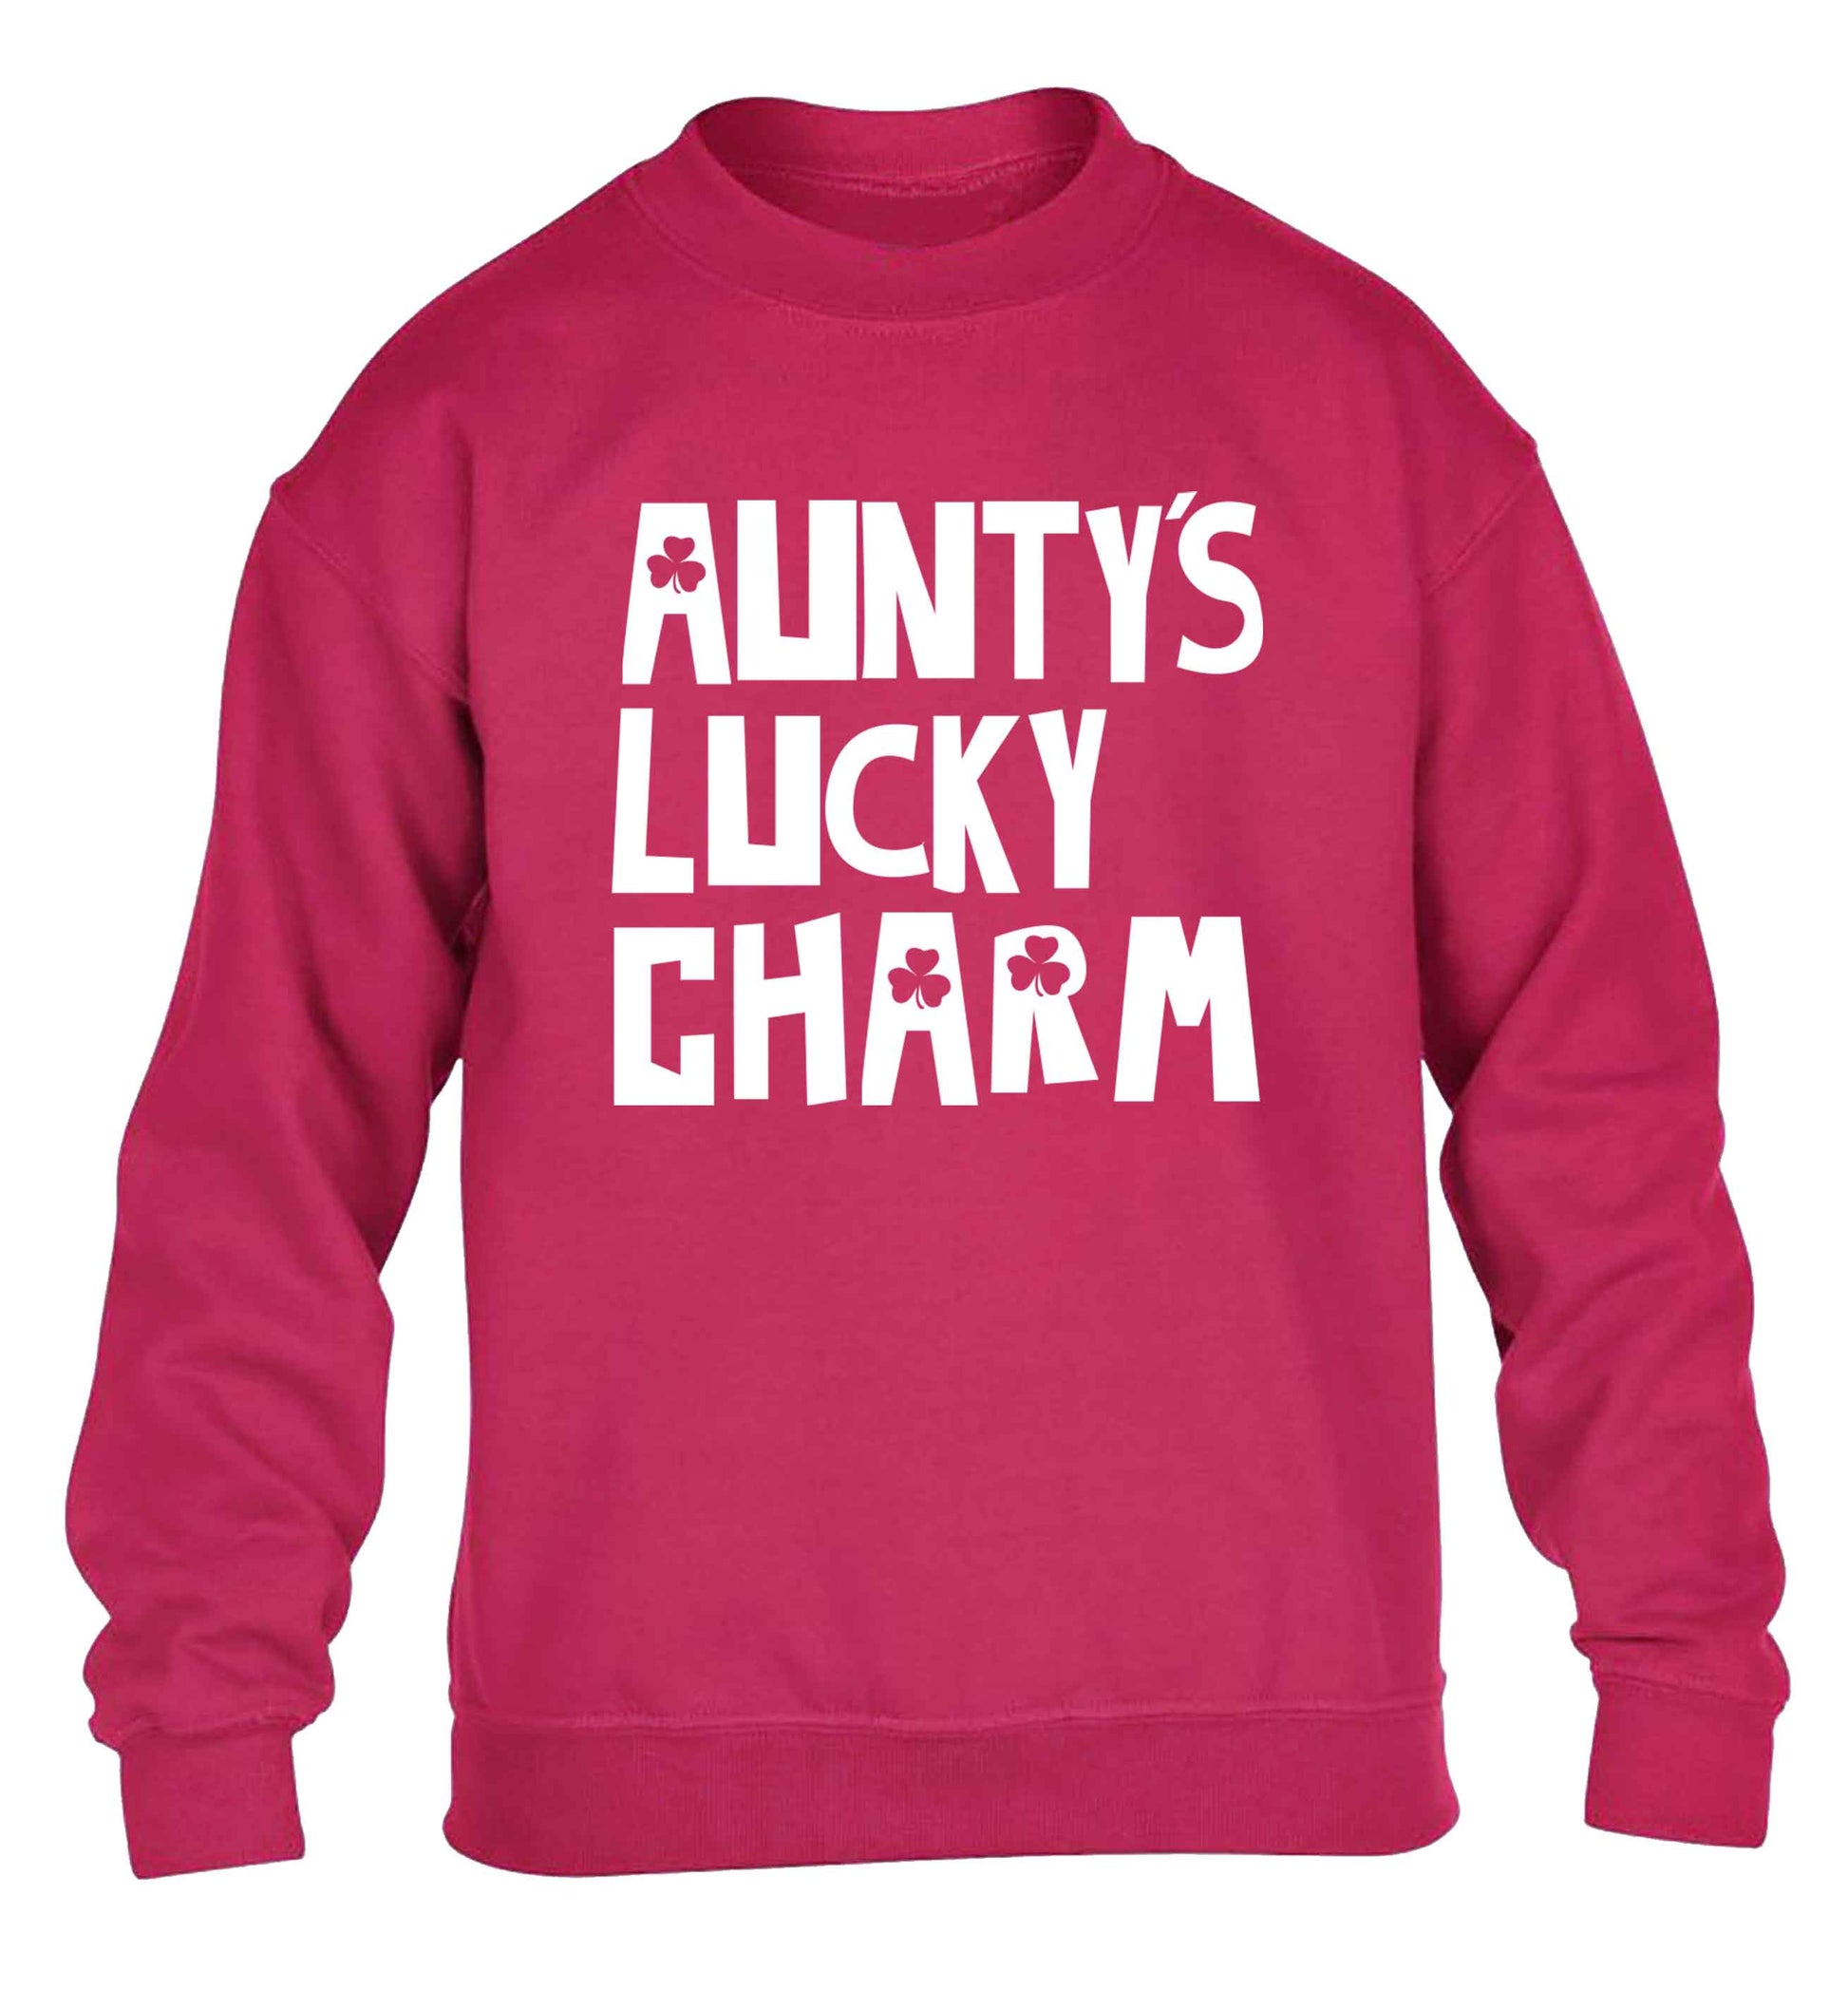 Aunty's lucky charm children's pink sweater 12-13 Years